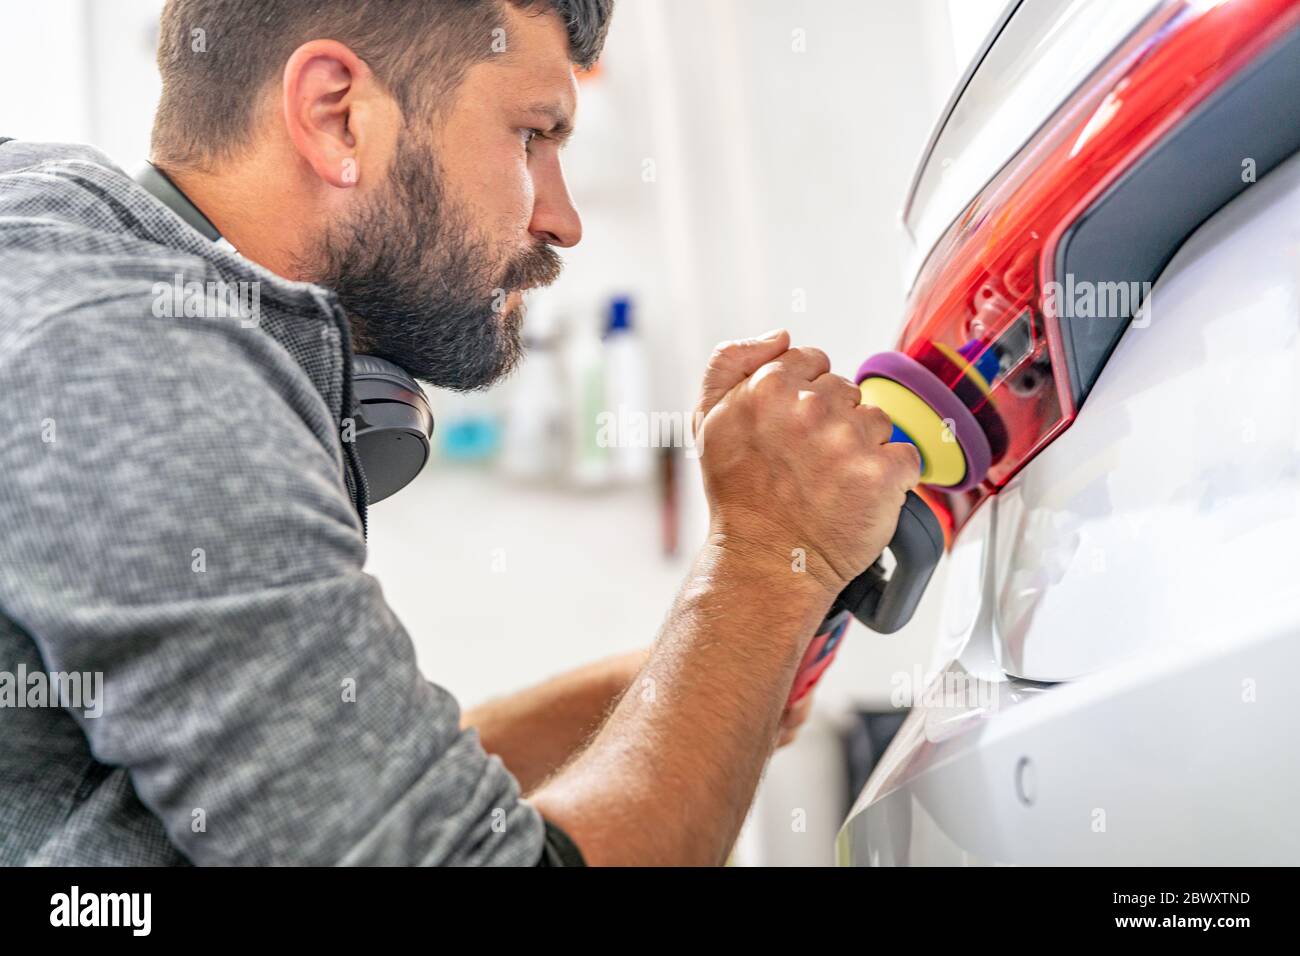 manual polishing of the headlight of luxury cars with the application of protective equipment Stock Photo